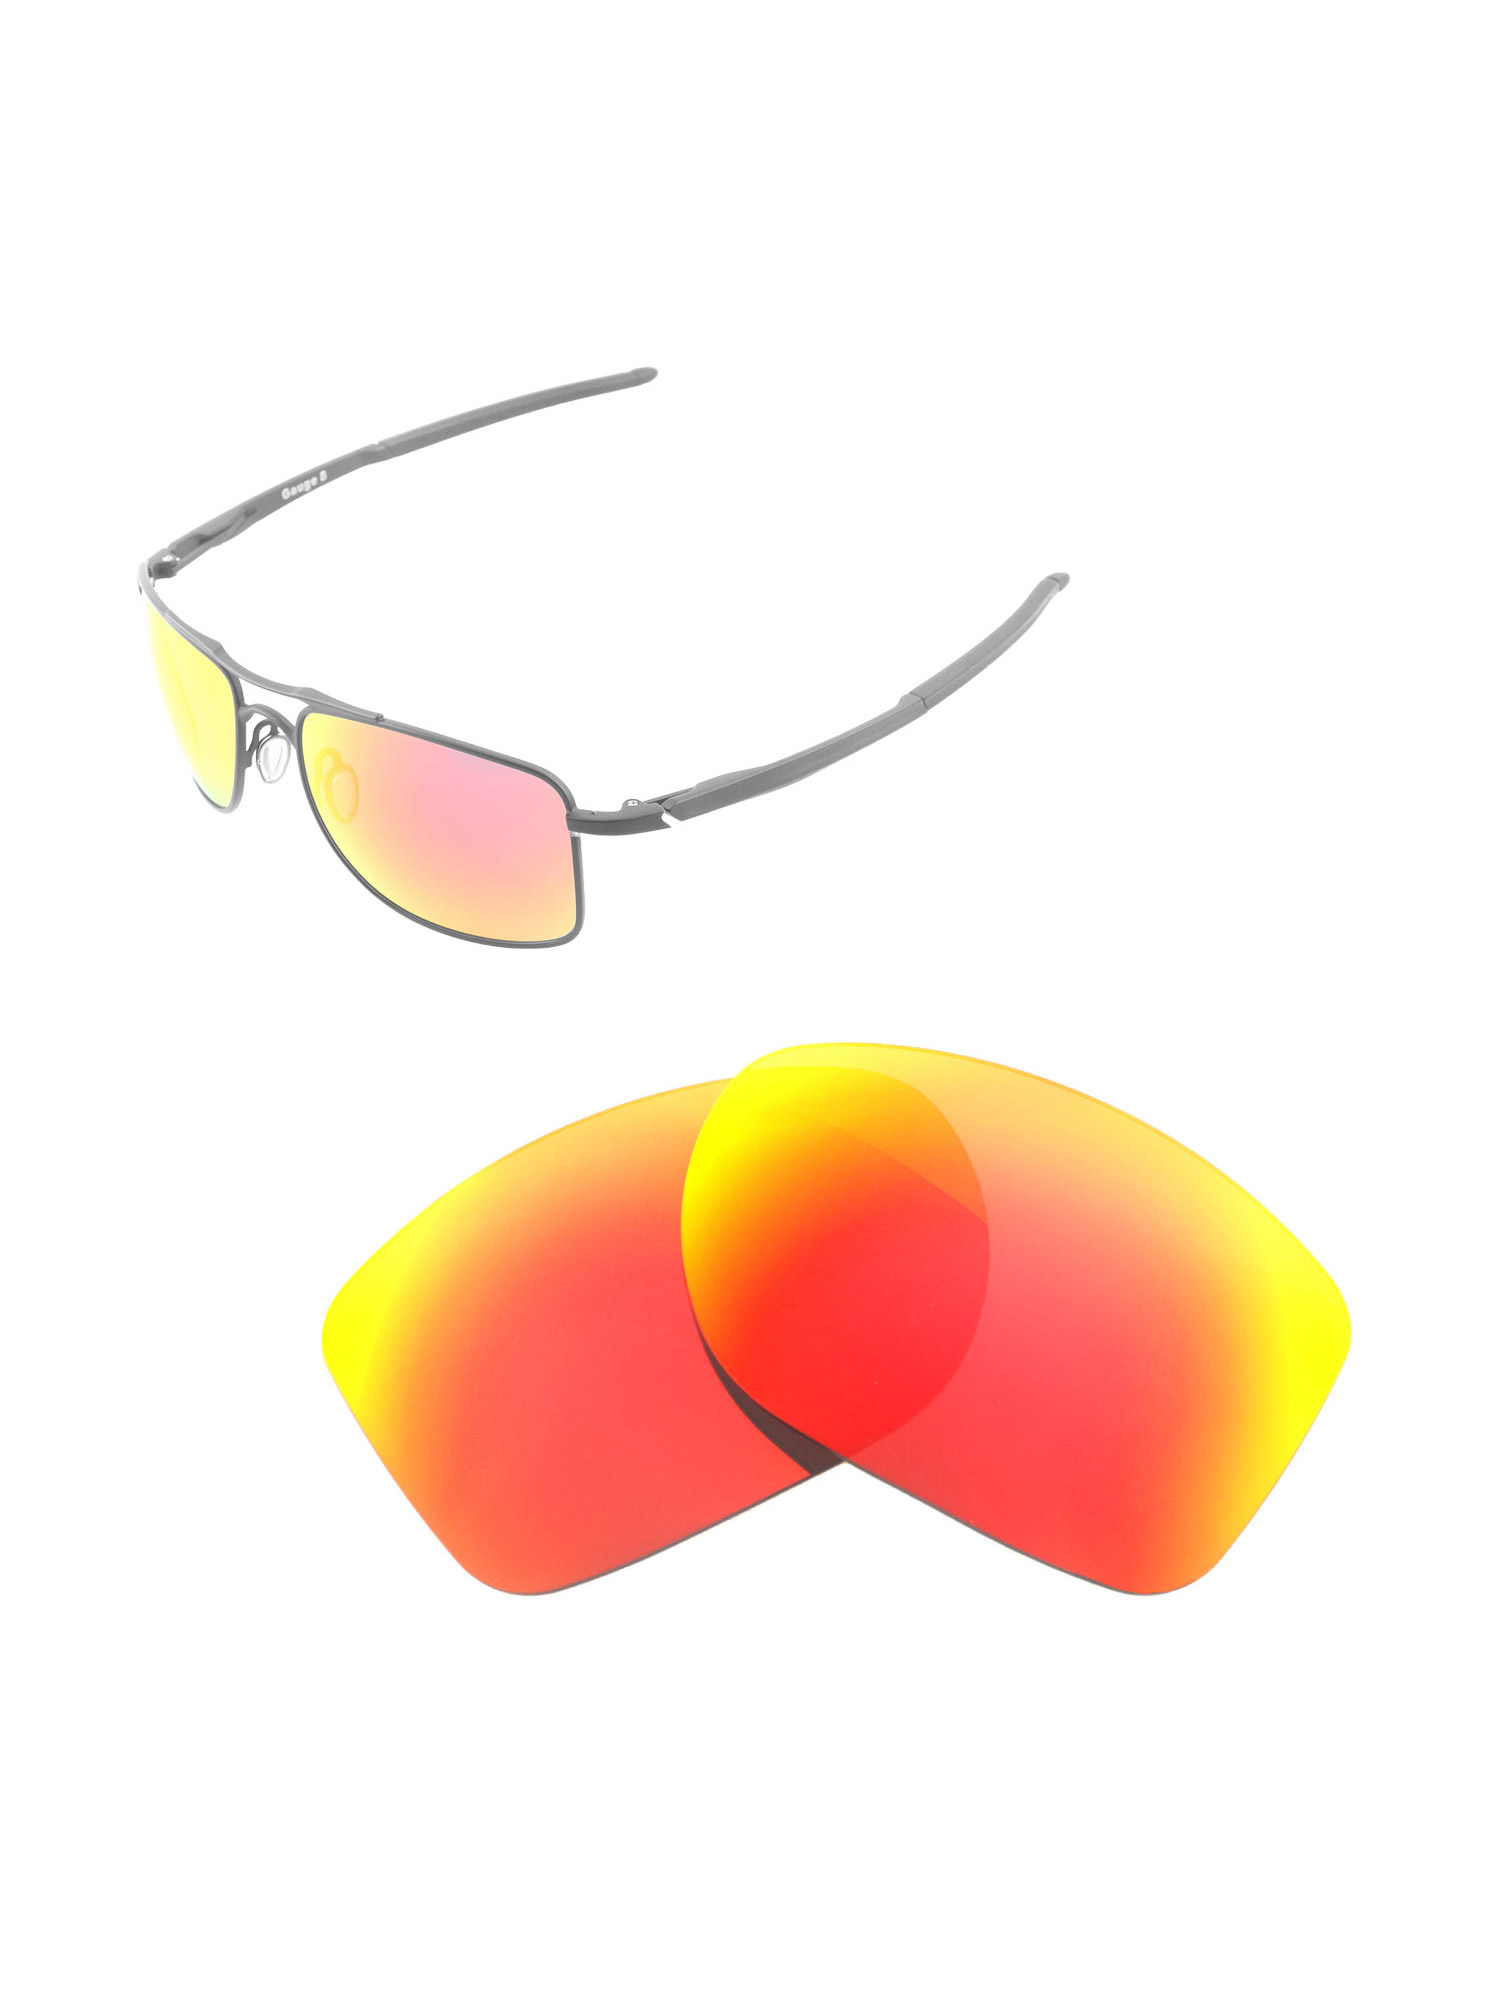 Walleva Fire Red Polarized Replacement Lenses for Oakley Gauge 8 M Sunglasses - image 5 of 7